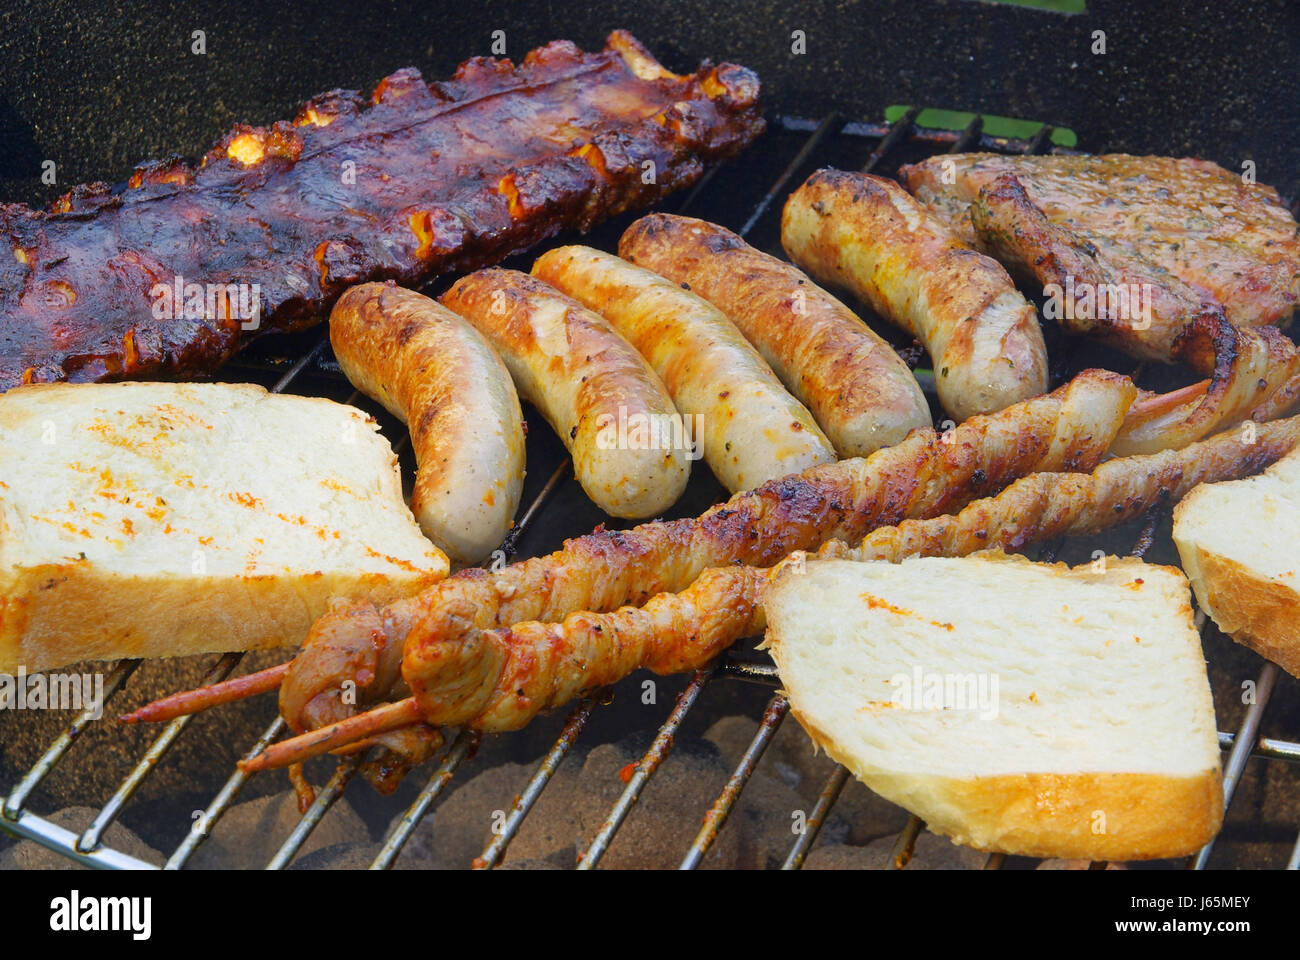 fish sausage trout grill barbecue barbeque meat food aliment fish boil cooks Stock Photo